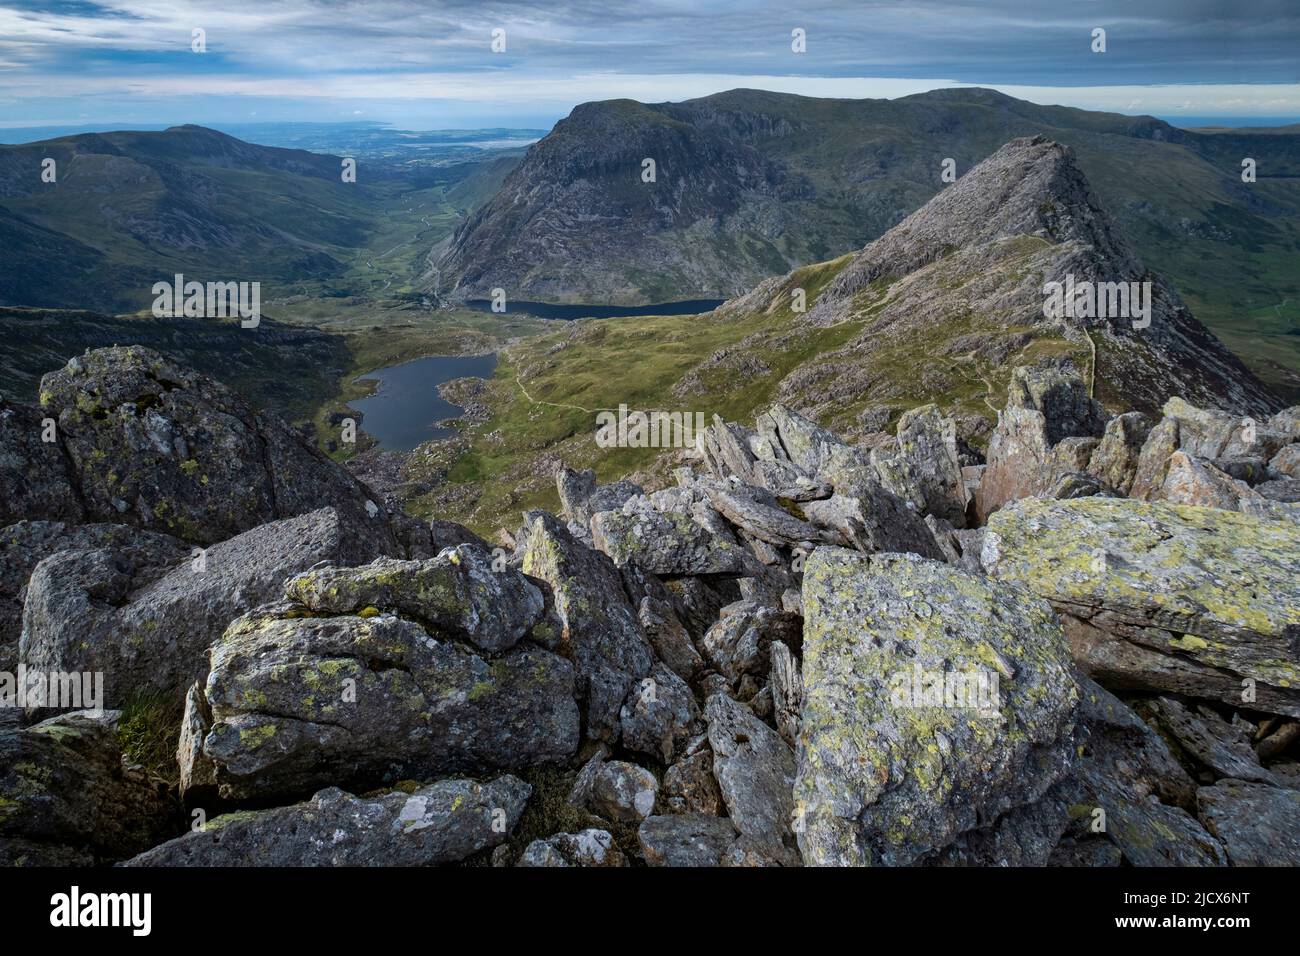 Tryfan, the Ogwen Valley and Glyderau Mountains viewed from Bristly Ridge, Snowdonia National Park, North Wales, United Kingdom, Europe Stock Photo